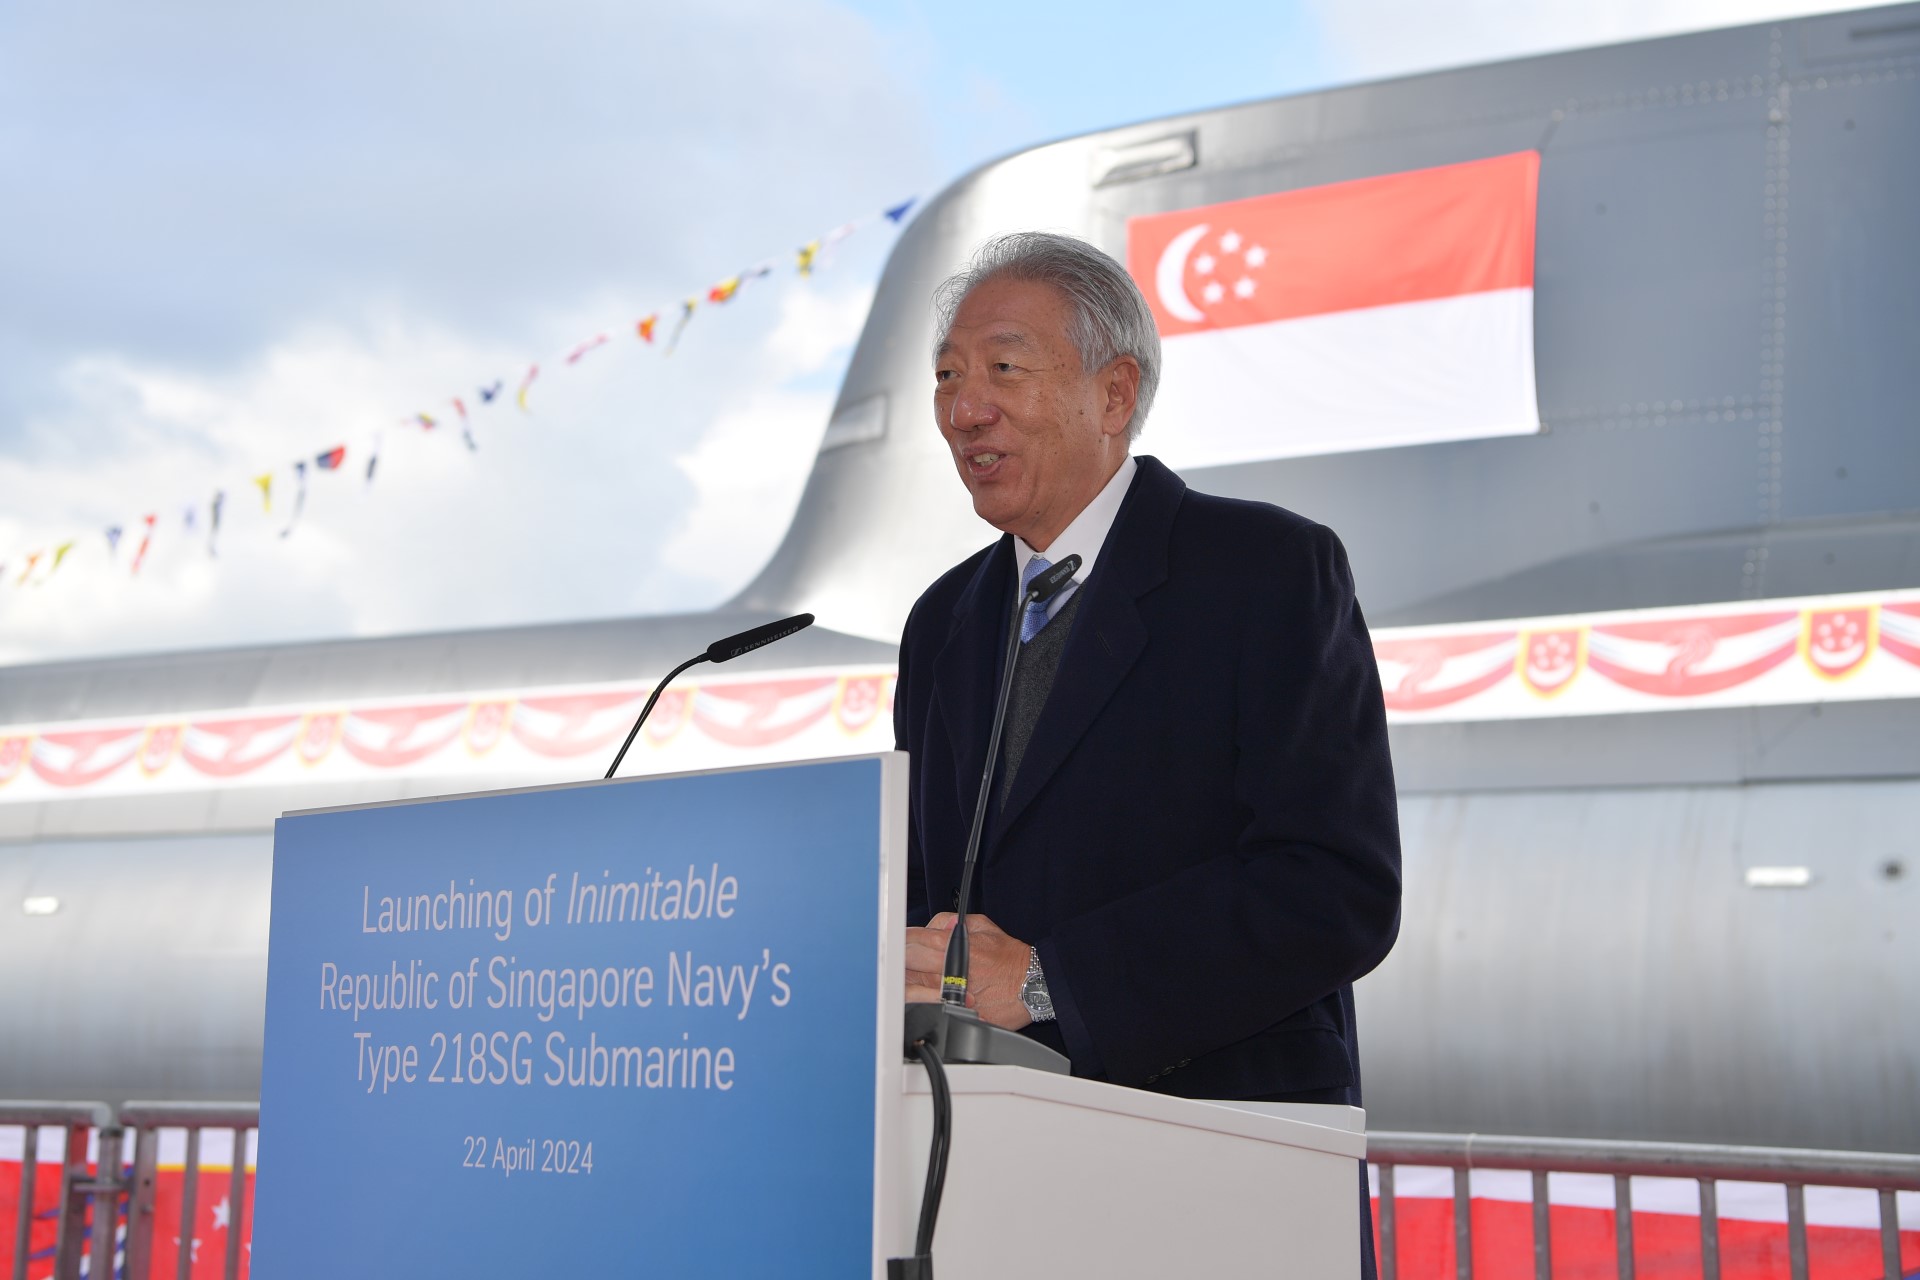 Senior Minister and Coordinating Minister for National Security Teo Chee Hean conducts the launching ceremony of the Singapore Navy's Inimitable Fourth Invincible Class Submarine